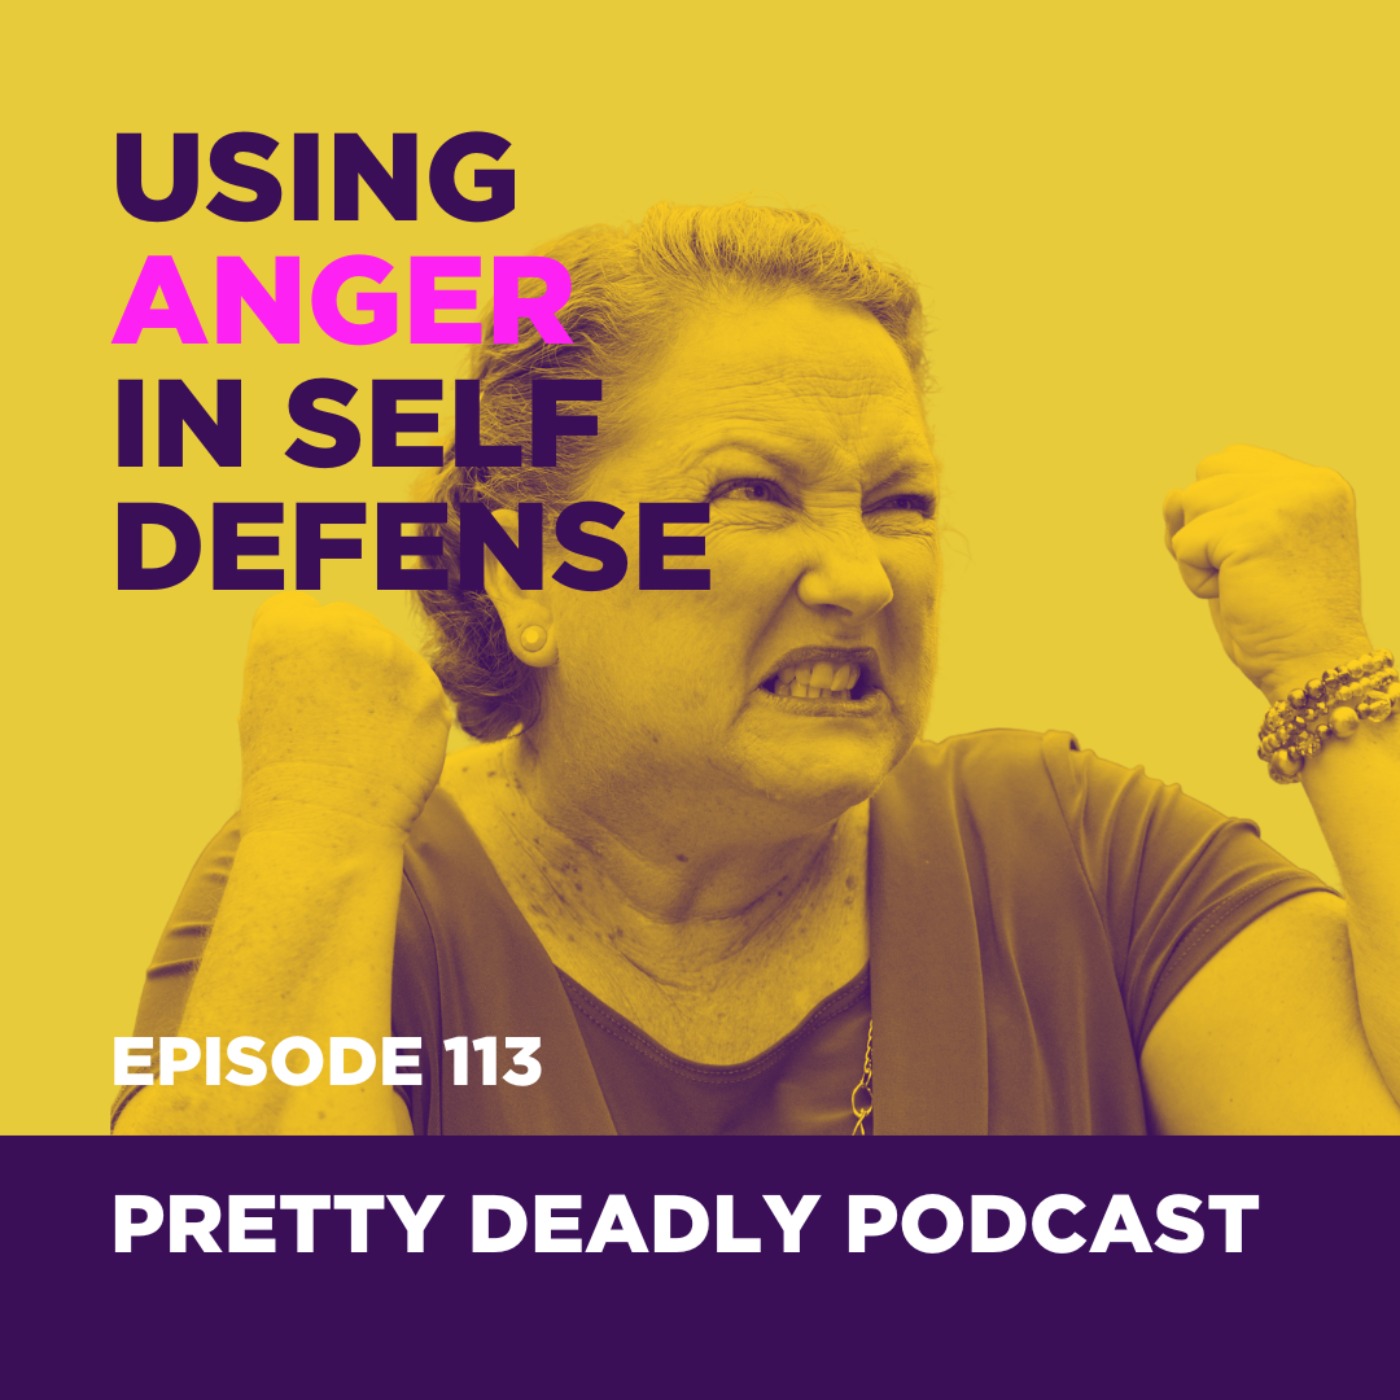 S7 Episode 113: Using Anger in Self Defense | Pretty Deady Podcast